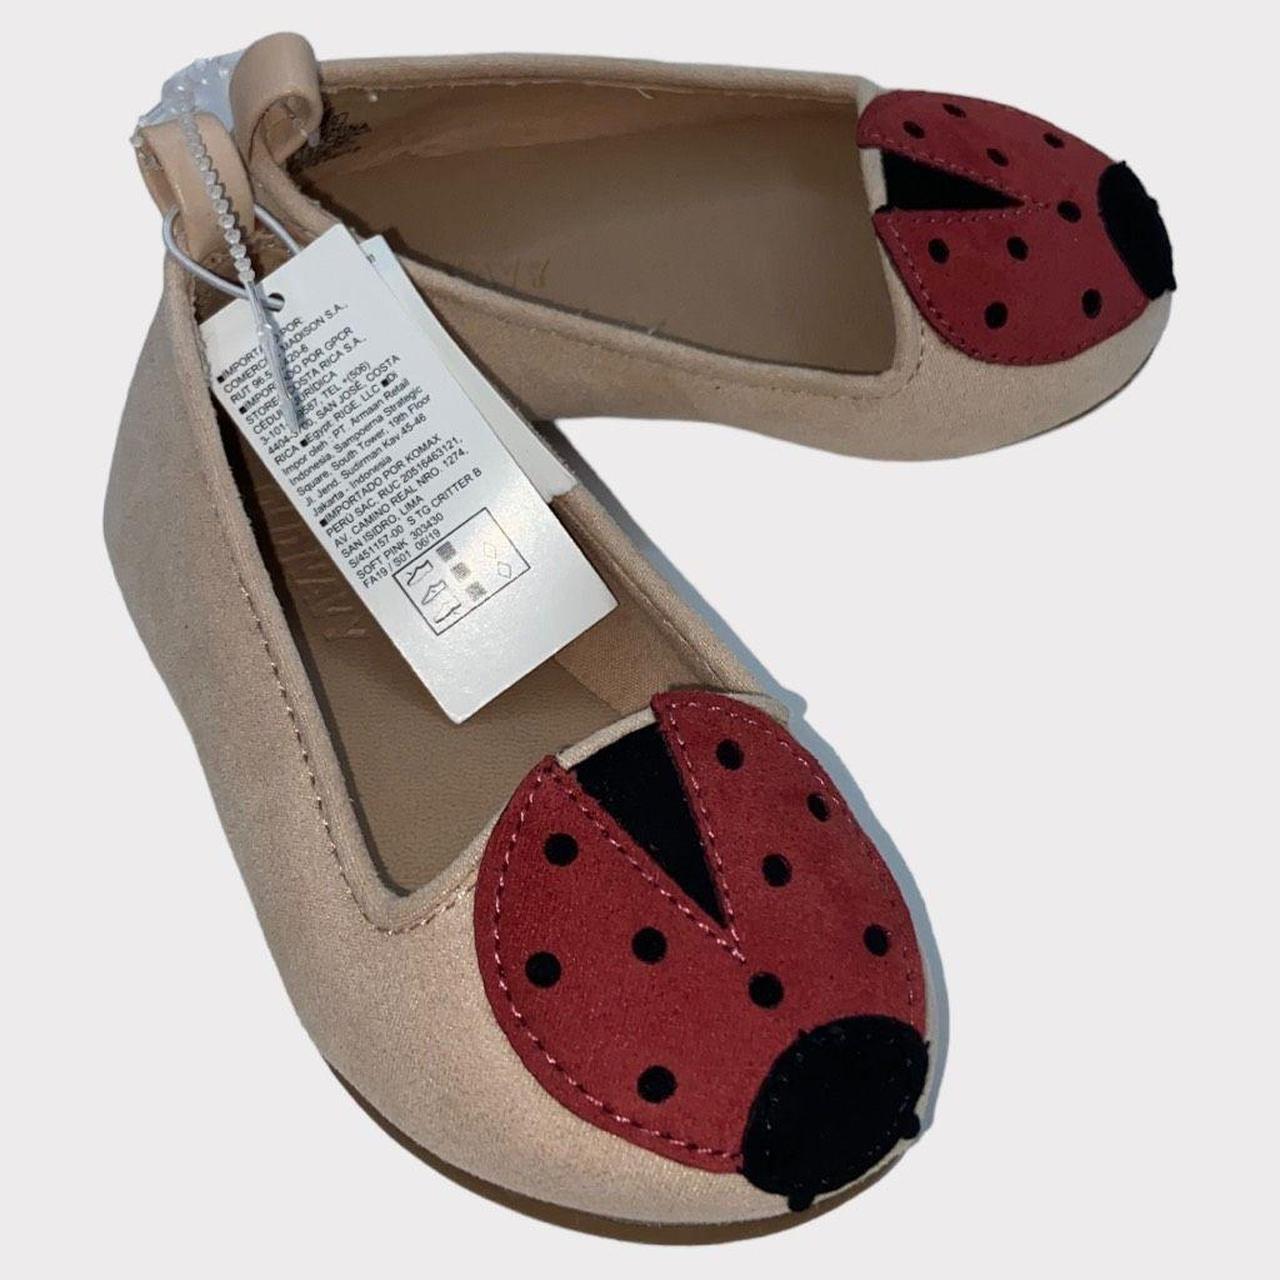 🐞 NEW ladybug sneakers for baby girls at Target! 😍 super cute